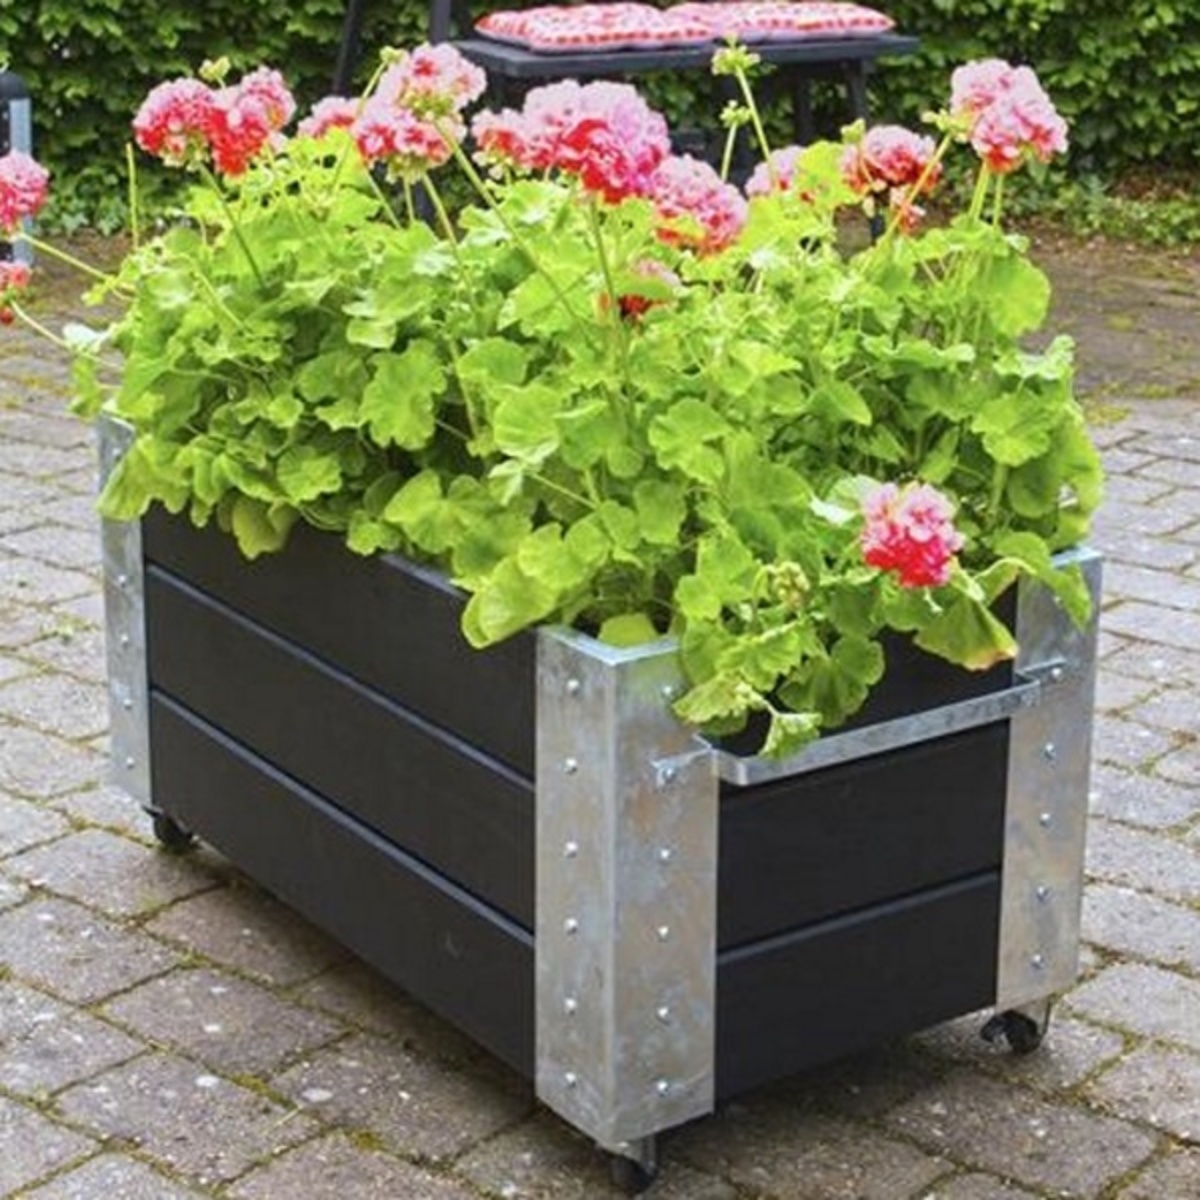 Cubic planter on wheels, also available with trellis